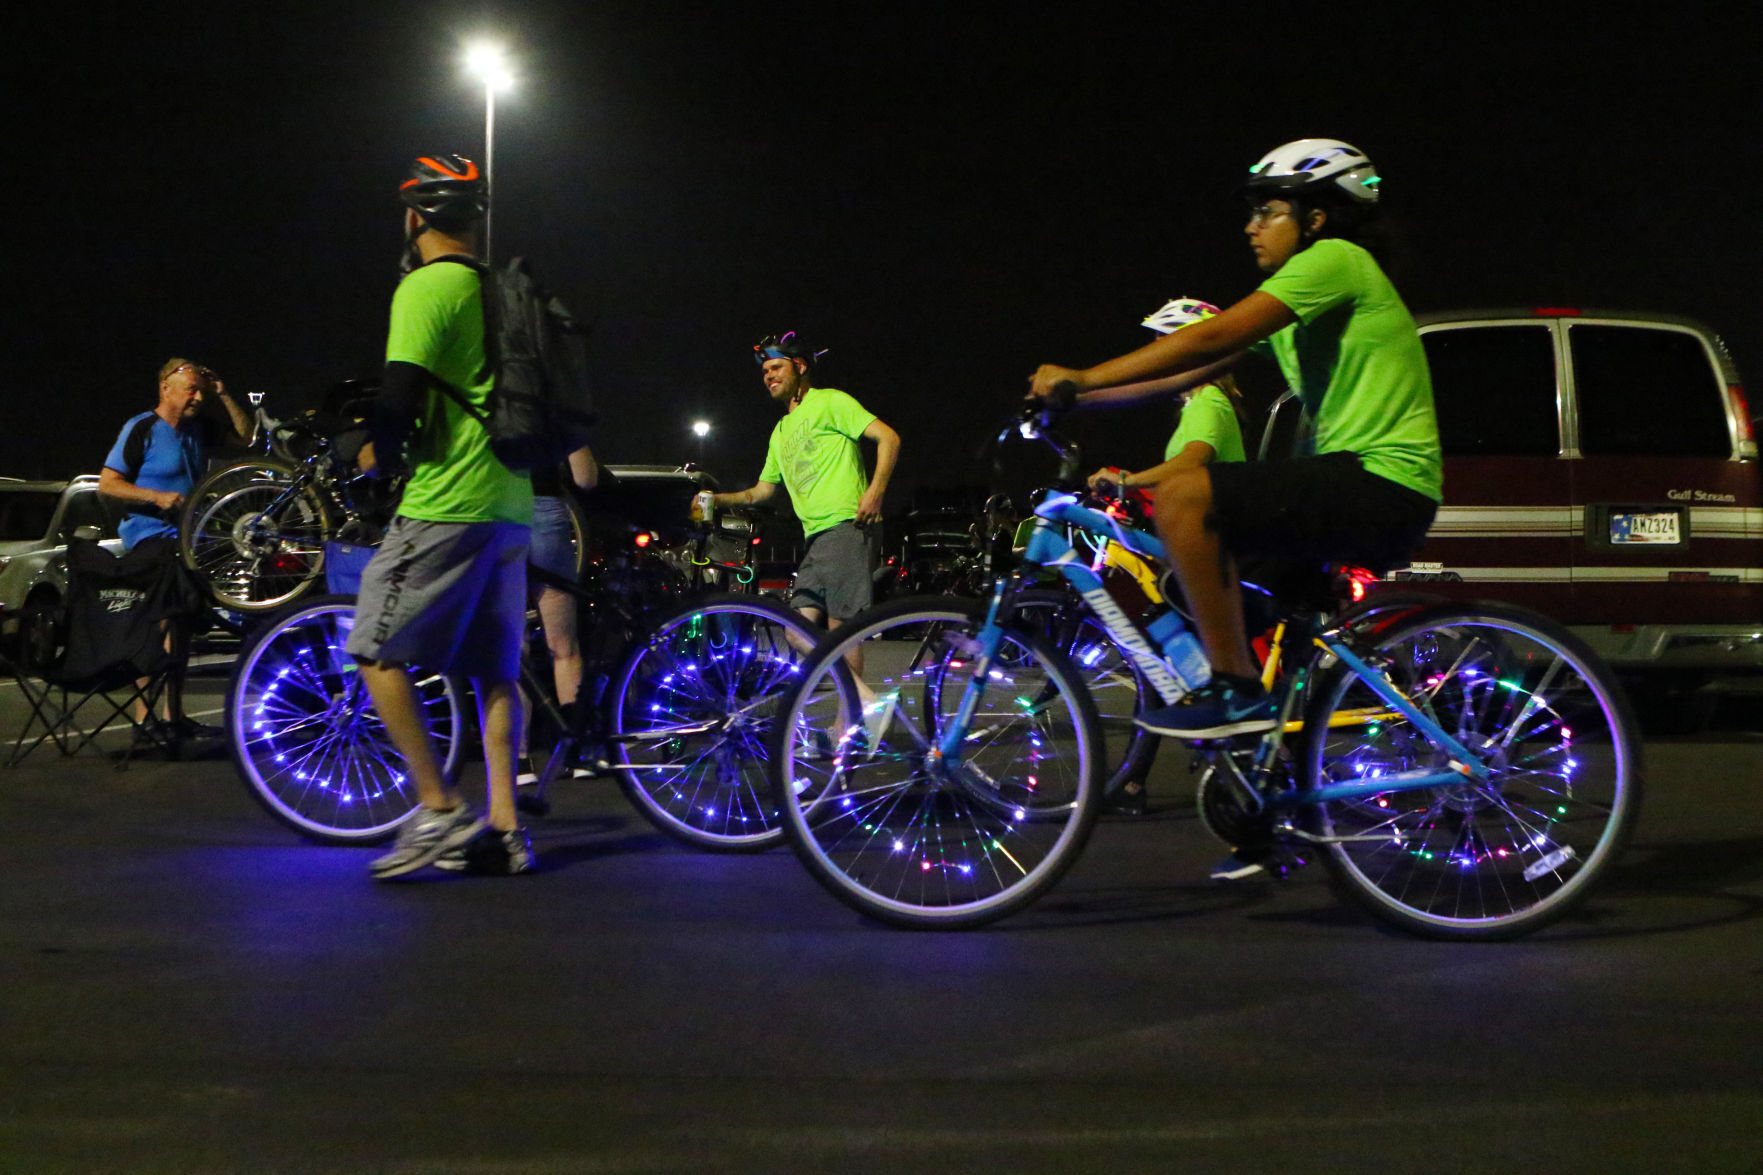 City announces 9th annual WHAM! After Midnight Bike Ride